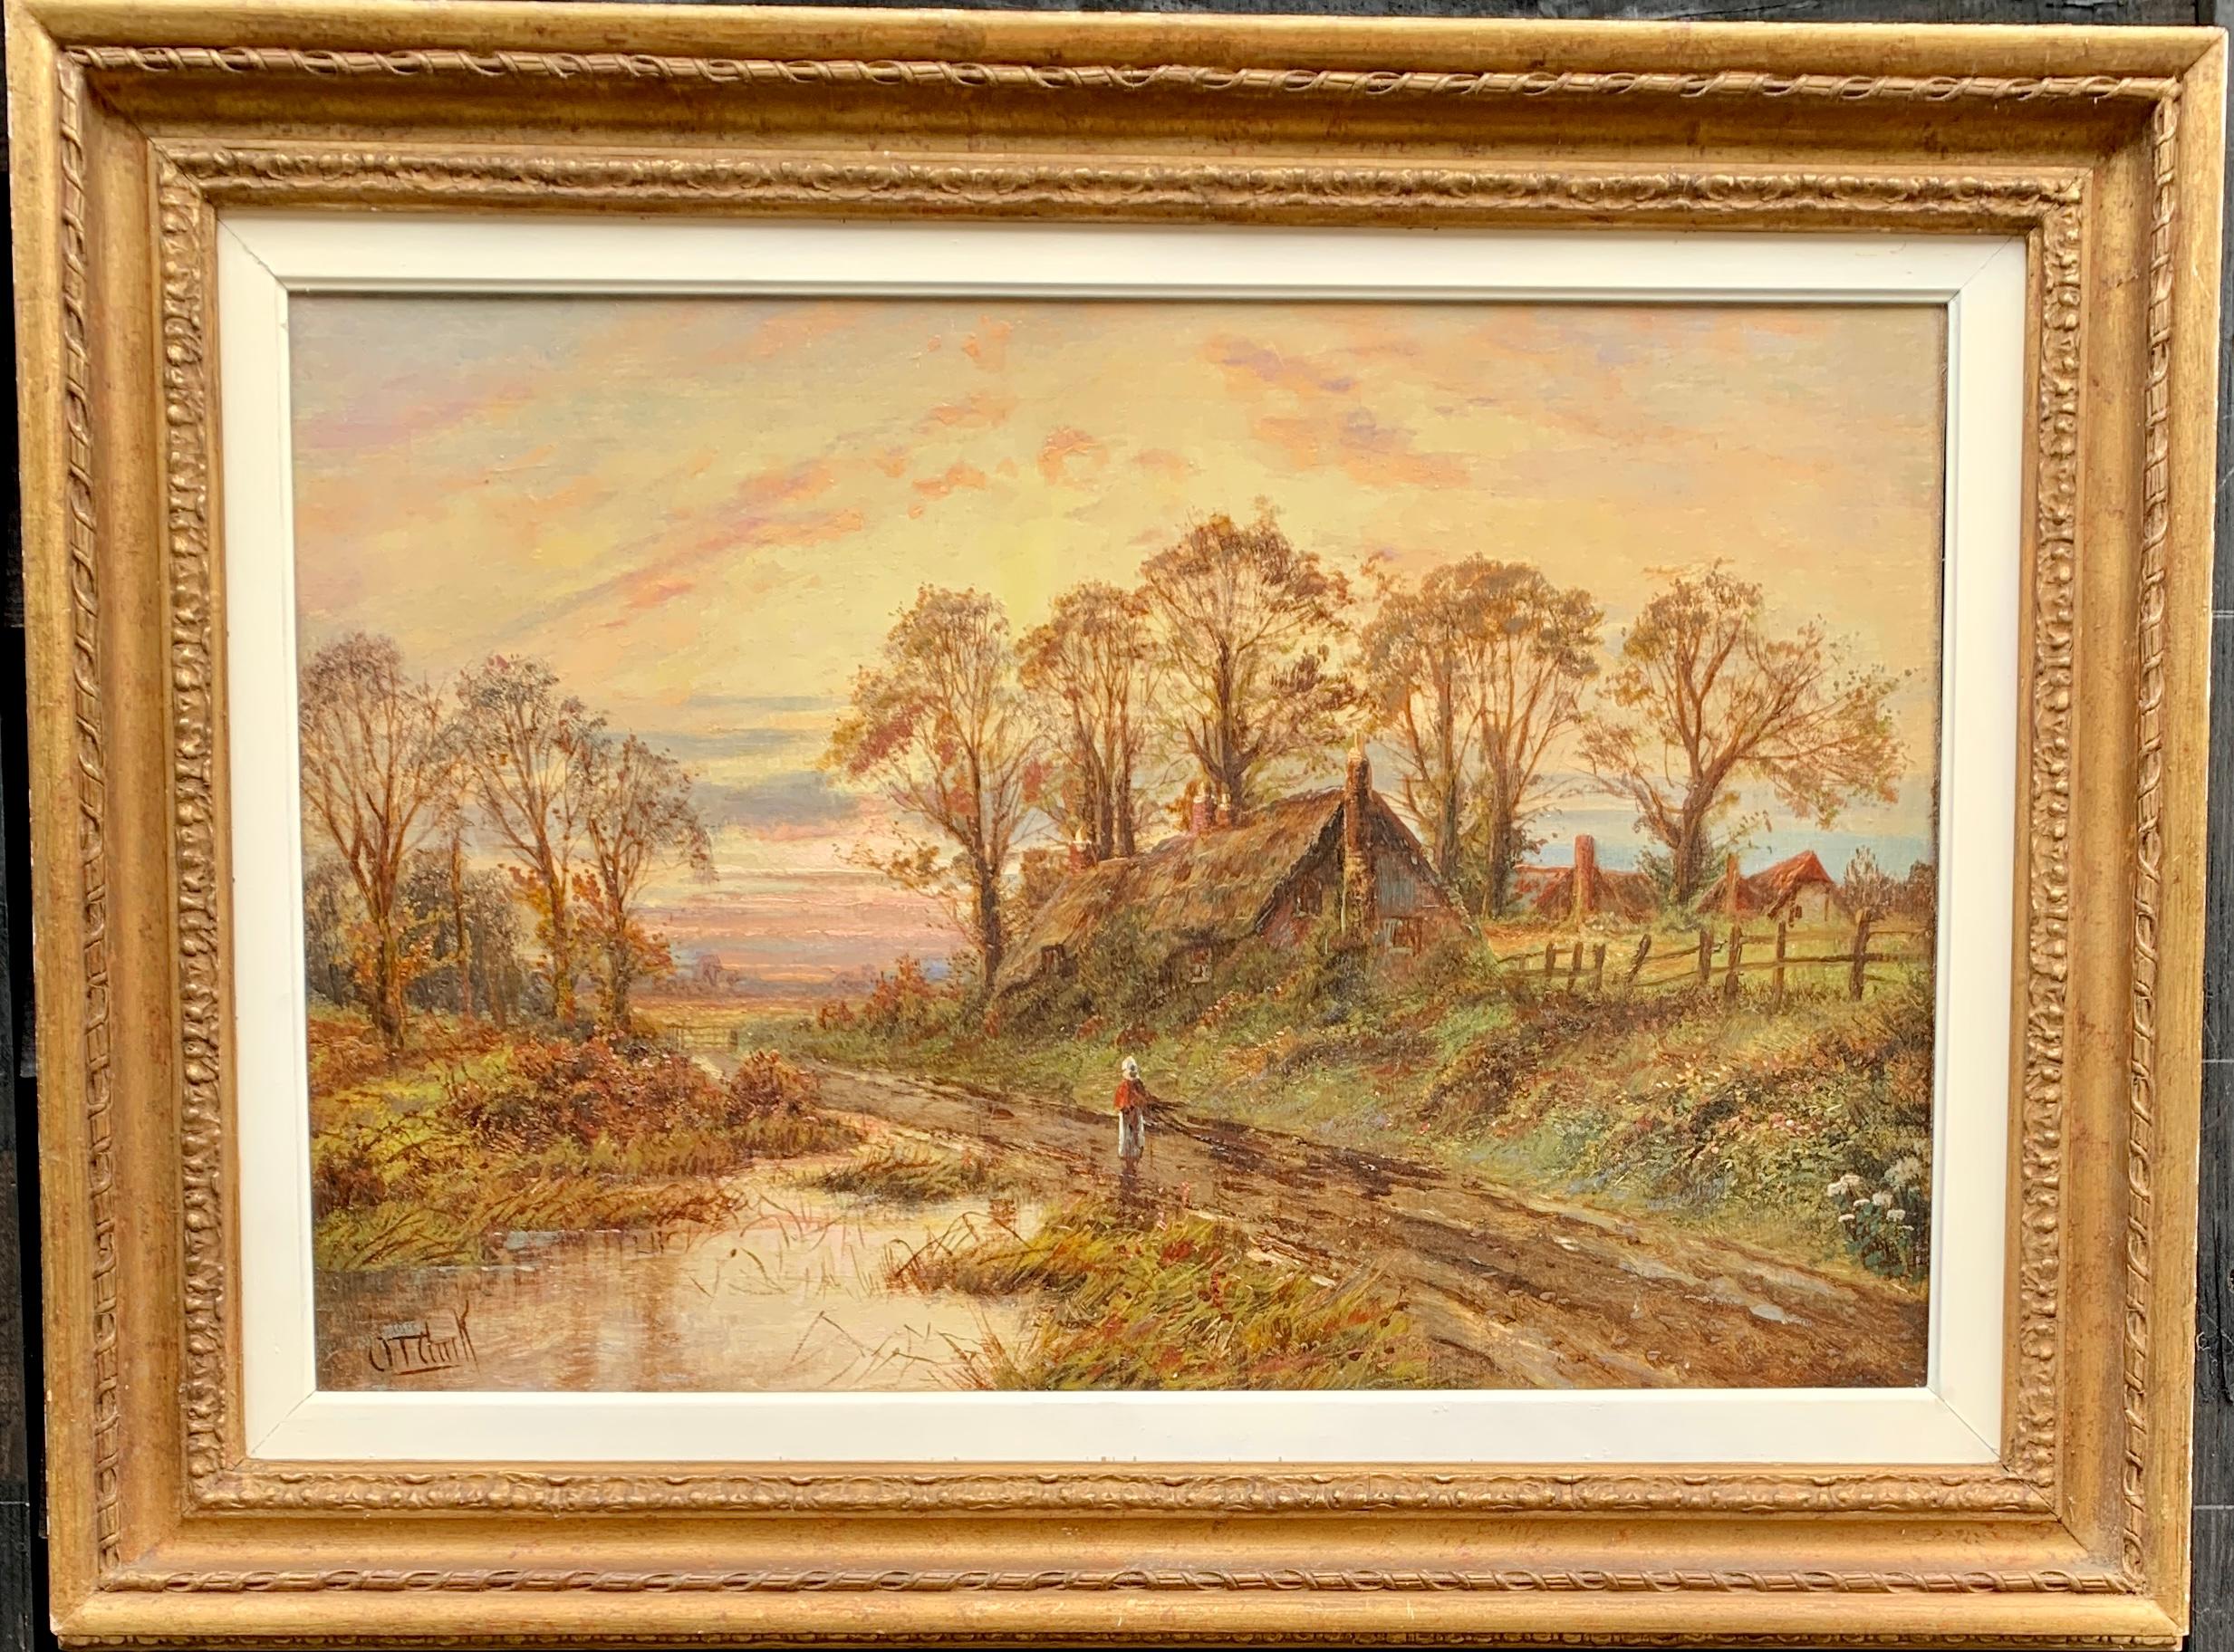 Octavius T. Clark Landscape Painting - 19th century Victorian English landscape with thatched cottage, figure at sunset